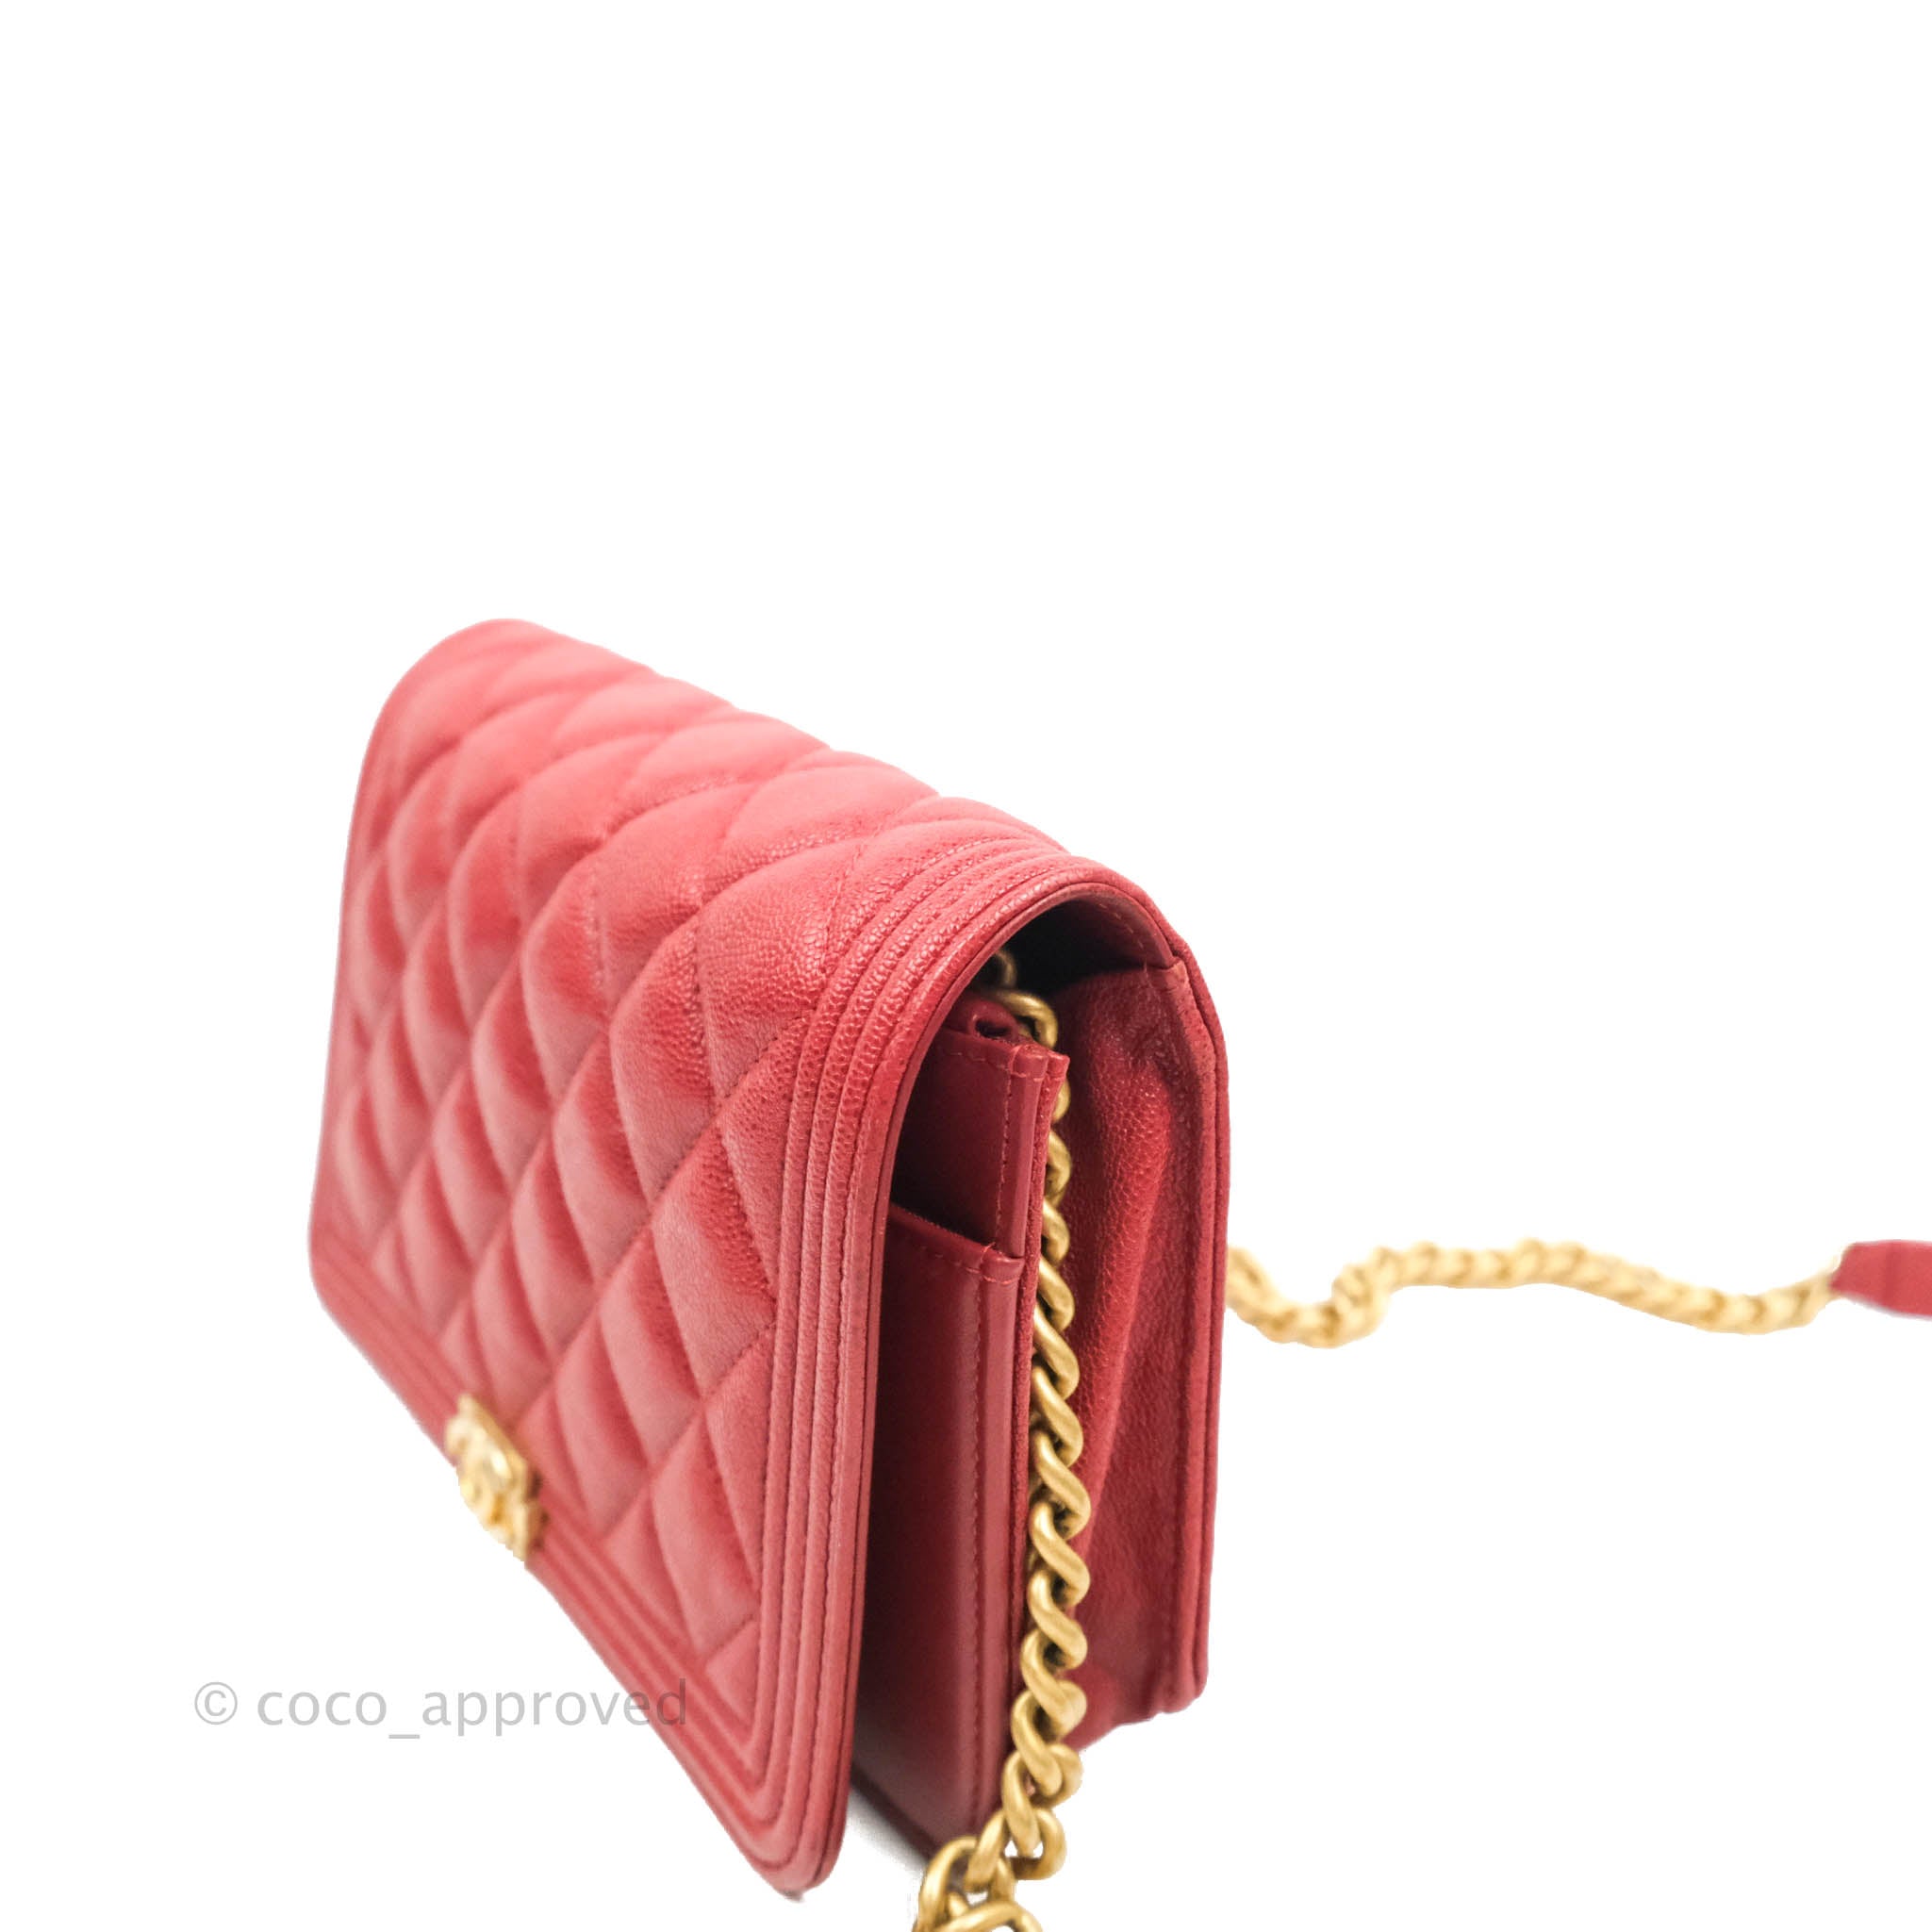 Chanel Red Quilted Caviar Classic Wallet on Chain (WOC) Q6BATL0FRB013